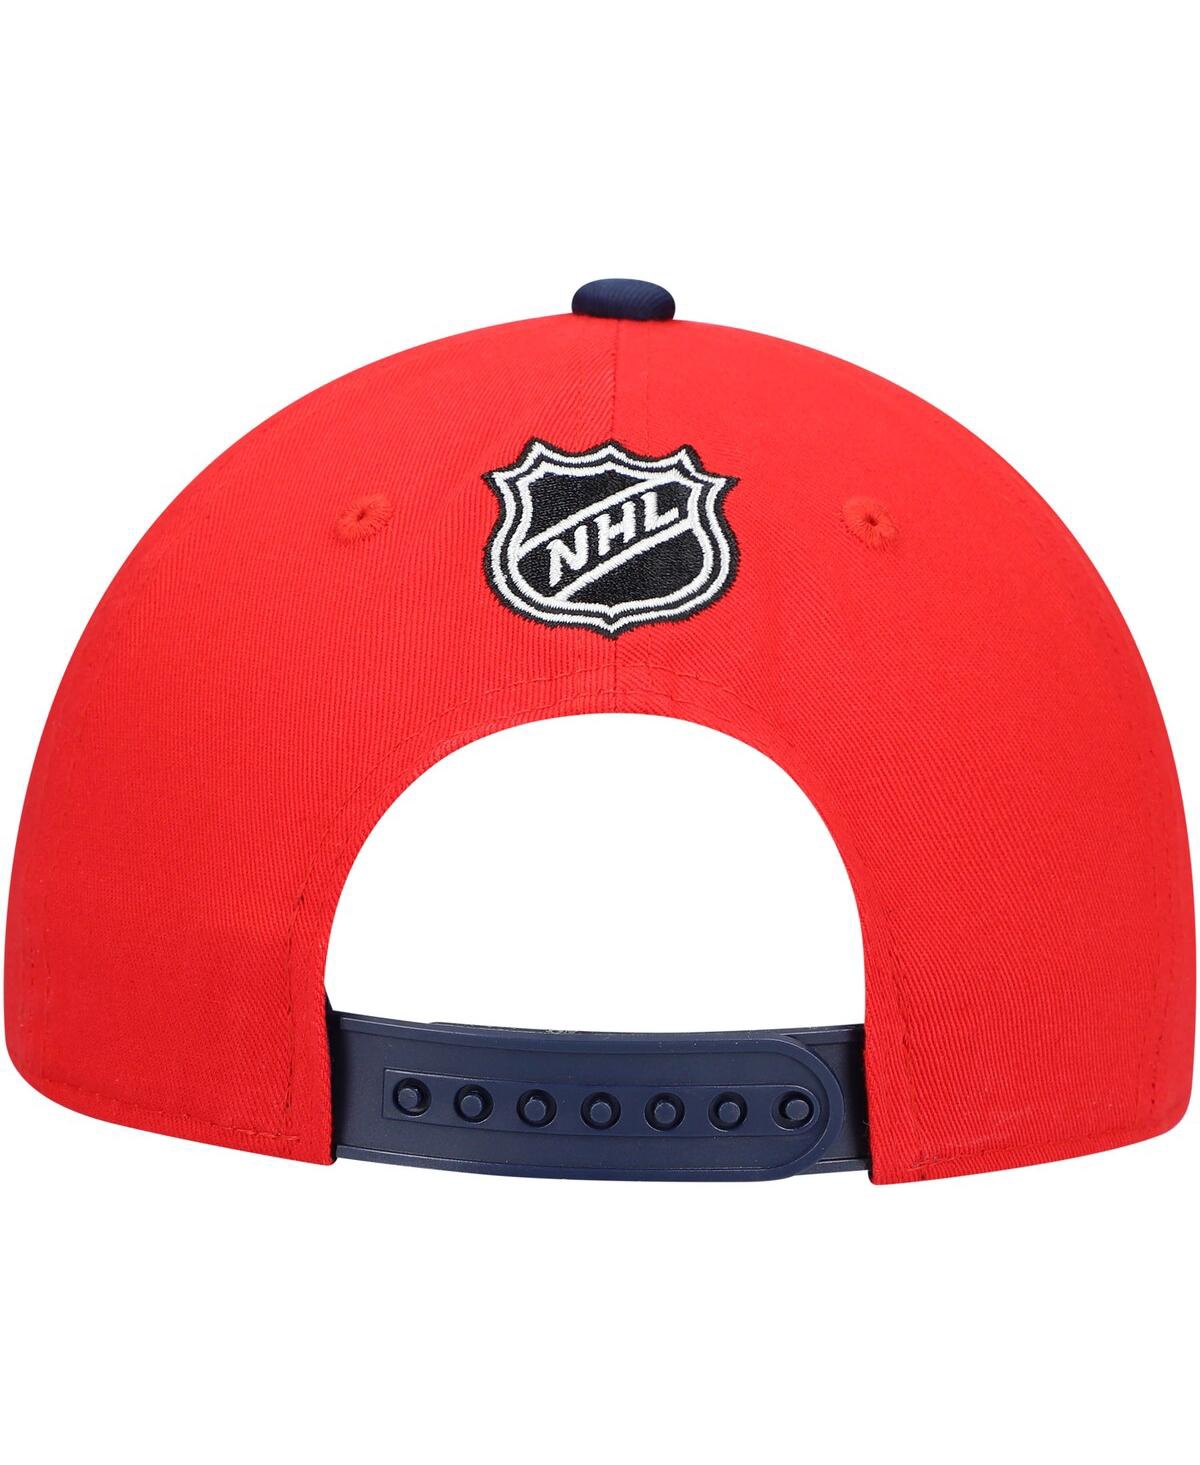 Shop Outerstuff Big Boys And Girls Red Washington Capitals Snapback Hat